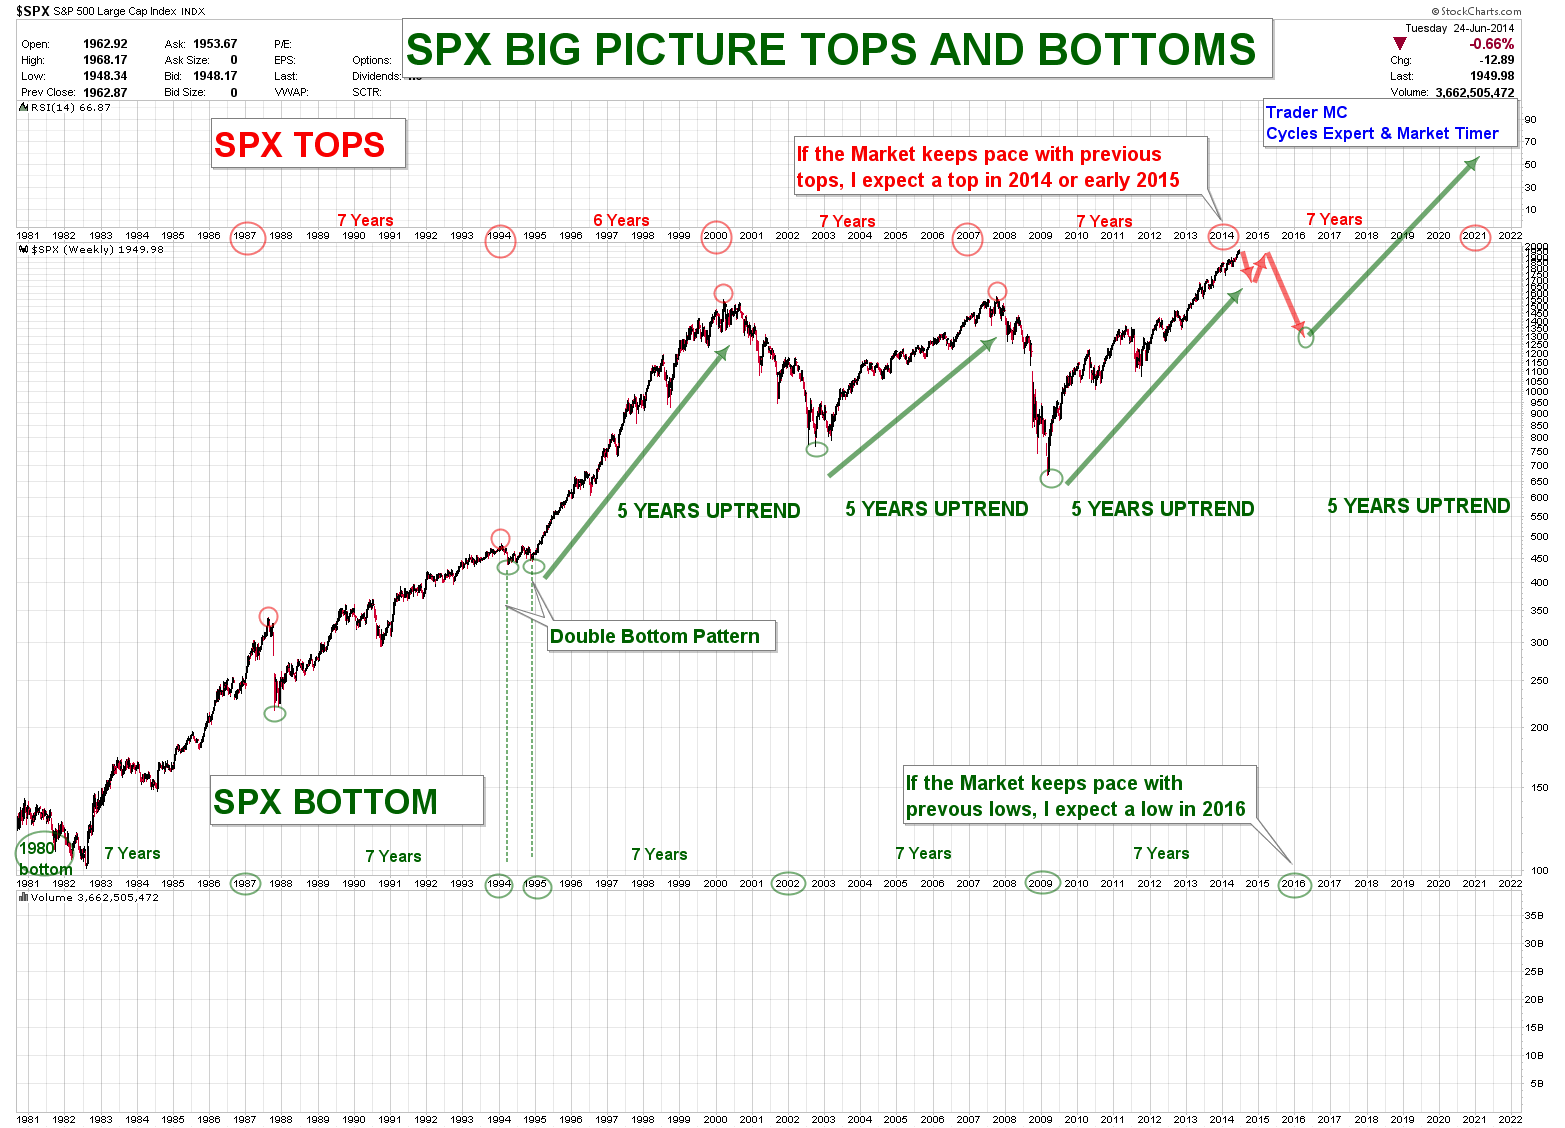 SPX-BIG-PICTURE-TOP-AND-BOTTOMS-JUN-24